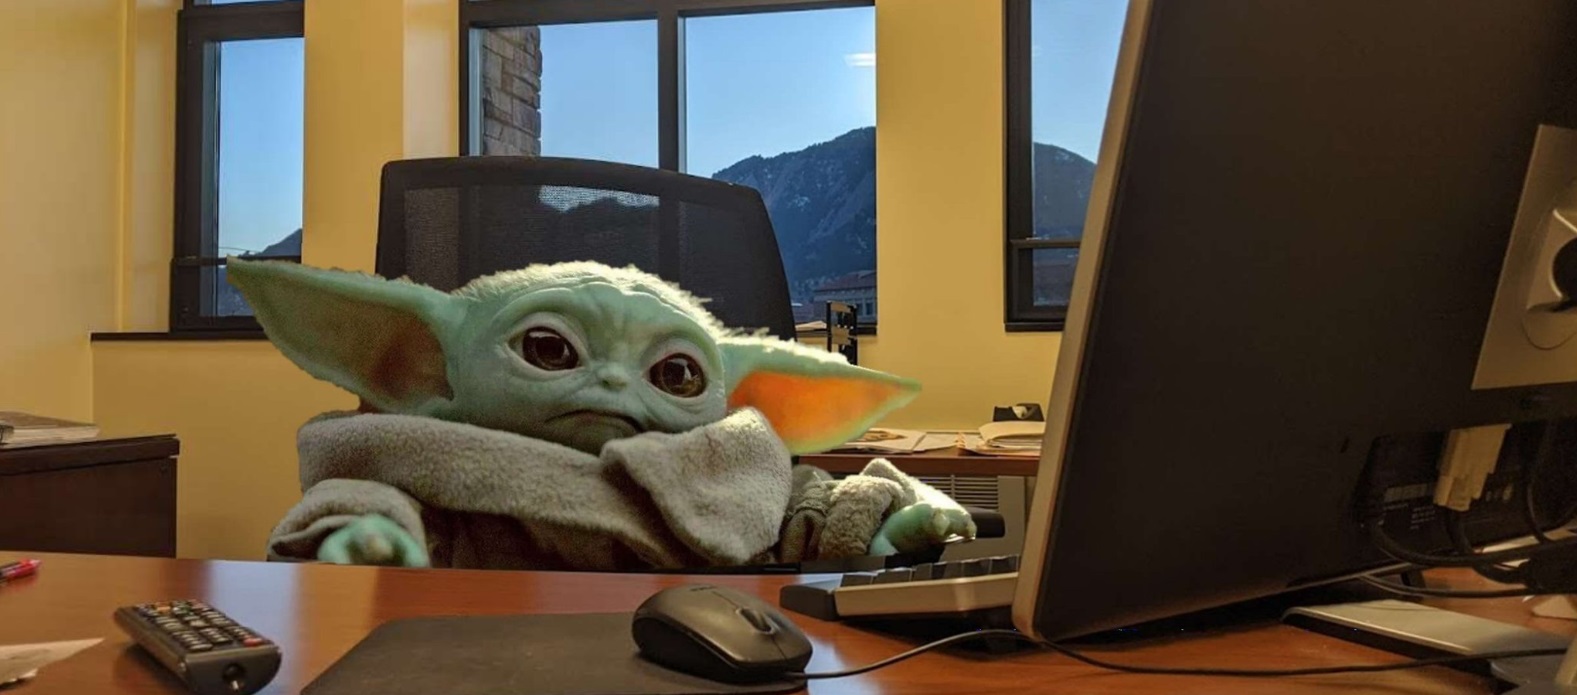 PHOTO-Baby-Yoda-At-Work-On-His-Office-Computer.jpg